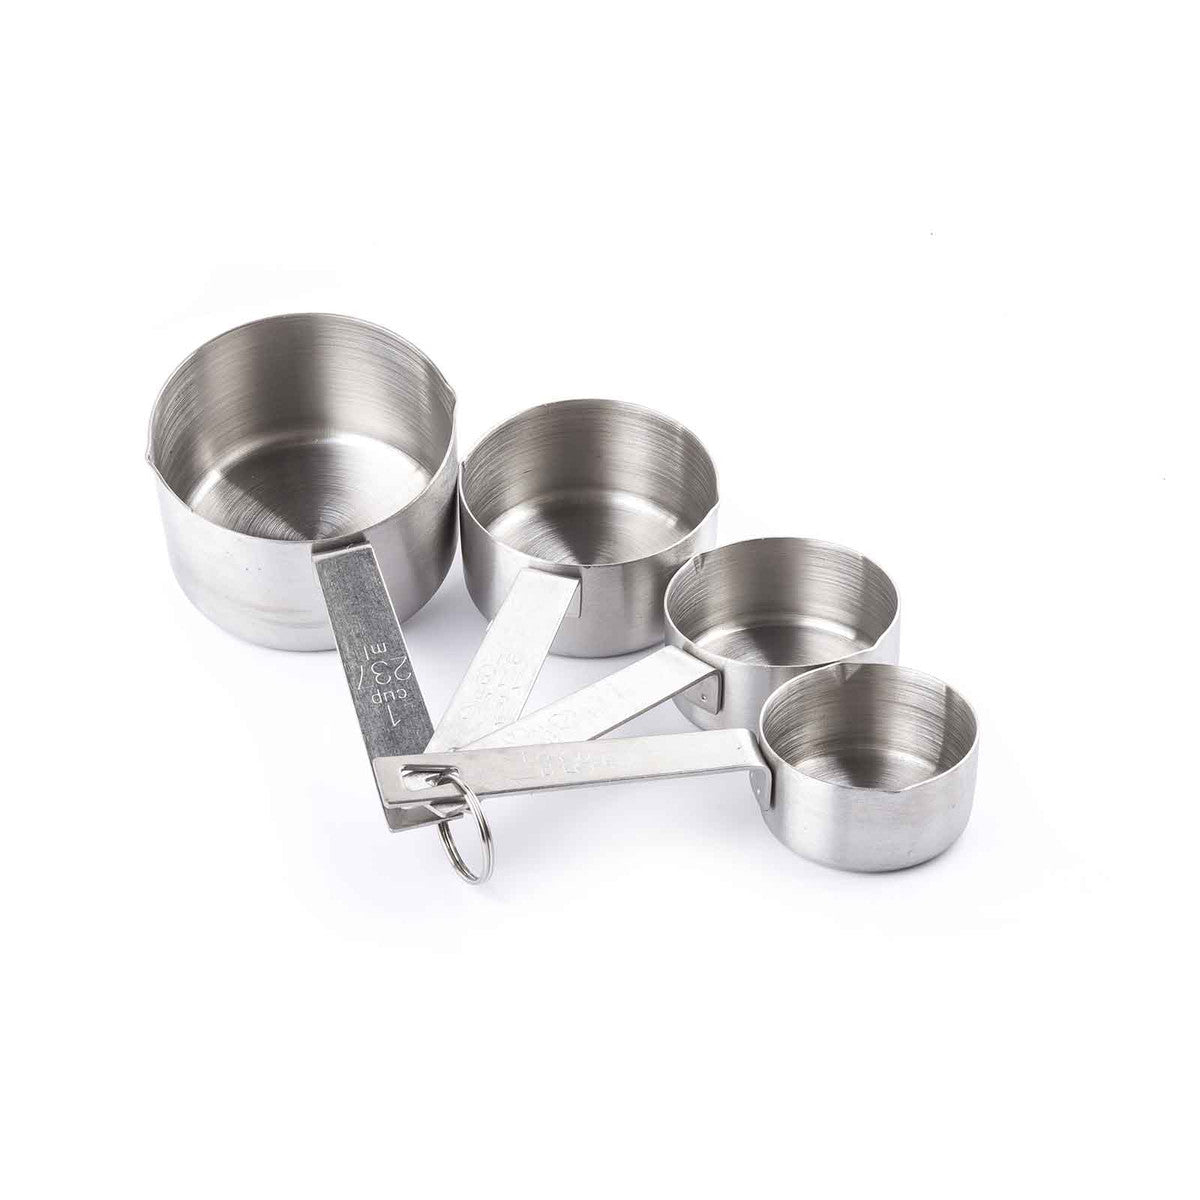 Kitchen Objects - Measuring Cup Set - Kitchenware - DANSKmadeforrooms